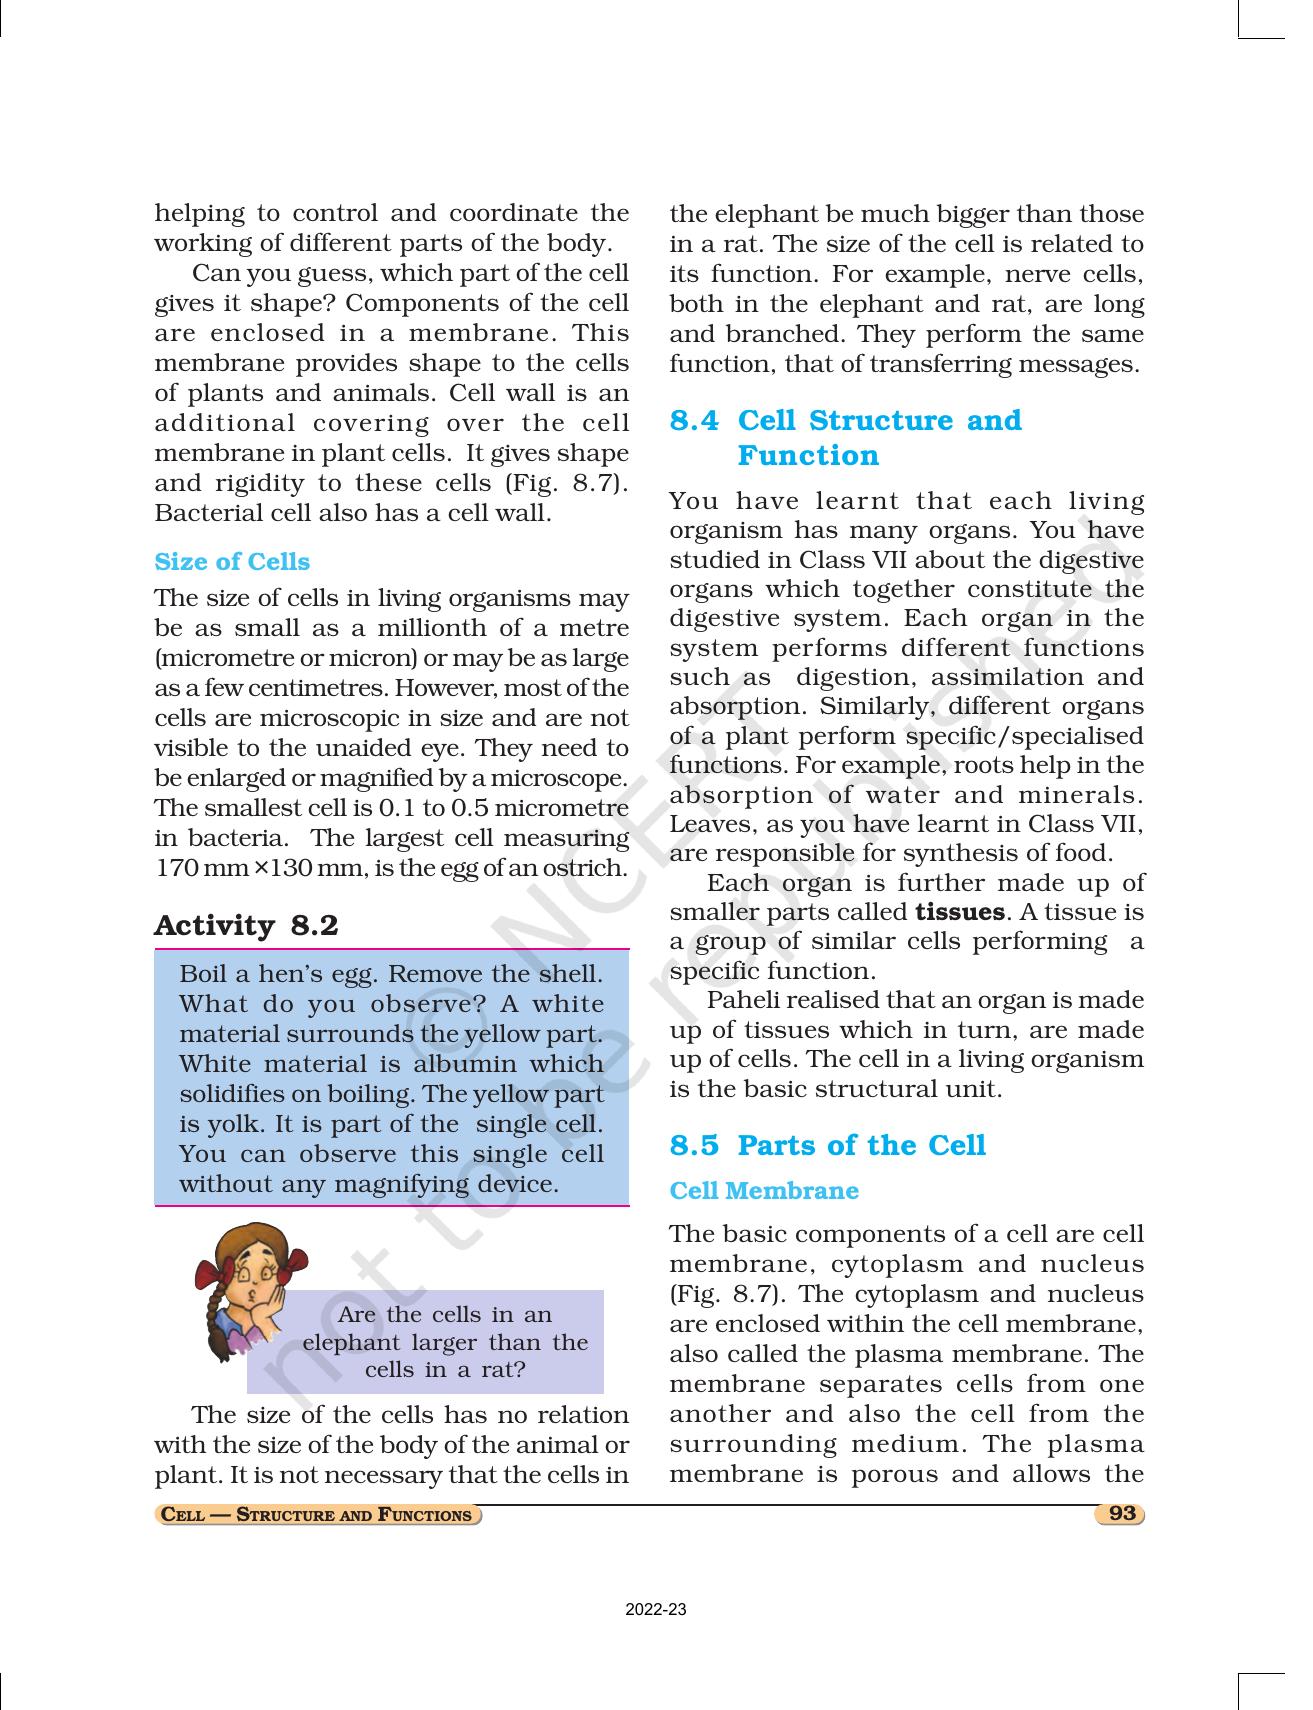 NCERT Book for Class 8 Science Chapter 8 Cell Structure and Functions - Page 4